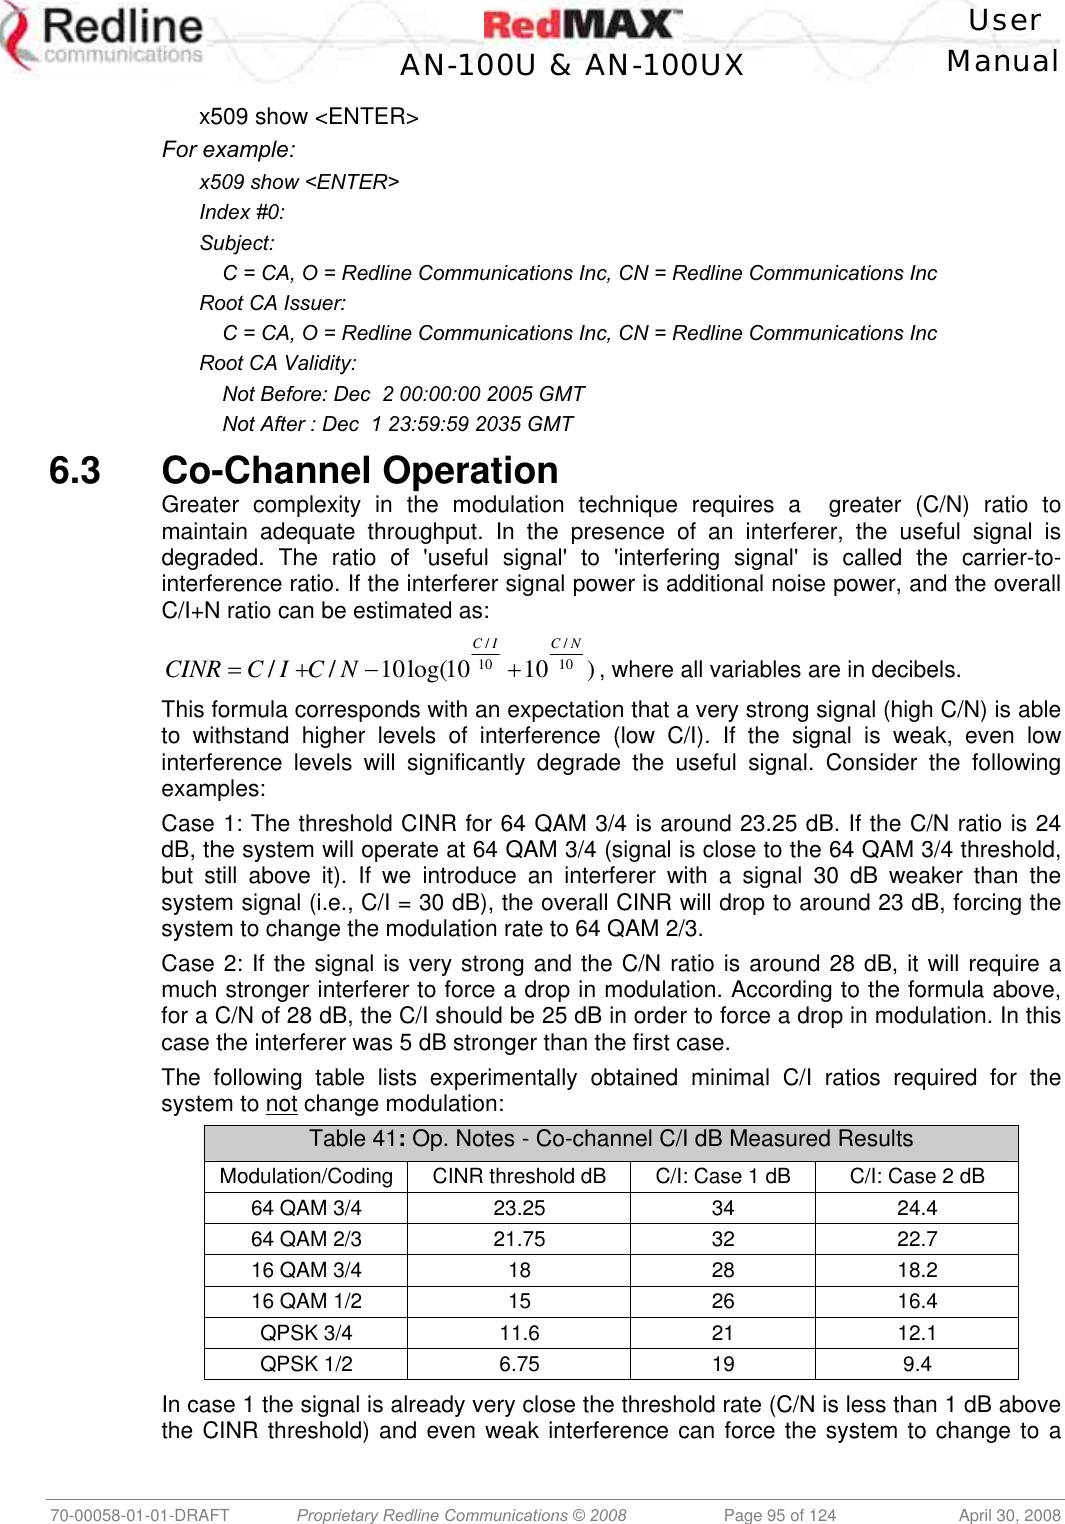    User  AN-100U &amp; AN-100UX Manual   70-00058-01-01-DRAFT  Proprietary Redline Communications © 2008   Page 95 of 124  April 30, 2008 x509 show &lt;ENTER&gt; For example: x509 show &lt;ENTER&gt; Index #0: Subject:     C = CA, O = Redline Communications Inc, CN = Redline Communications Inc Root CA Issuer:     C = CA, O = Redline Communications Inc, CN = Redline Communications Inc Root CA Validity:     Not Before: Dec  2 00:00:00 2005 GMT     Not After : Dec  1 23:59:59 2035 GMT  6.3 Co-Channel Operation Greater complexity in the modulation technique requires a  greater (C/N) ratio to maintain adequate throughput. In the presence of an interferer, the useful signal is degraded. The ratio of &apos;useful signal&apos; to &apos;interfering signal&apos; is called the carrier-to-interference ratio. If the interferer signal power is additional noise power, and the overall C/I+N ratio can be estimated as: )1010log(10// 10/10/NCICNCICCINR +−+= , where all variables are in decibels. This formula corresponds with an expectation that a very strong signal (high C/N) is able to withstand higher levels of interference (low C/I). If the signal is weak, even low interference levels will significantly degrade the useful signal. Consider the following examples: Case 1: The threshold CINR for 64 QAM 3/4 is around 23.25 dB. If the C/N ratio is 24 dB, the system will operate at 64 QAM 3/4 (signal is close to the 64 QAM 3/4 threshold, but still above it). If we introduce an interferer with a signal 30 dB weaker than the system signal (i.e., C/I = 30 dB), the overall CINR will drop to around 23 dB, forcing the system to change the modulation rate to 64 QAM 2/3. Case 2: If the signal is very strong and the C/N ratio is around 28 dB, it will require a much stronger interferer to force a drop in modulation. According to the formula above, for a C/N of 28 dB, the C/I should be 25 dB in order to force a drop in modulation. In this case the interferer was 5 dB stronger than the first case. The following table lists experimentally obtained minimal C/I ratios required for the system to not change modulation: Table 41: Op. Notes - Co-channel C/I dB Measured Results Modulation/Coding   CINR threshold dB  C/I: Case 1 dB  C/I: Case 2 dB 64 QAM 3/4  23.25  34  24.4 64 QAM 2/3  21.75  32  22.7 16 QAM 3/4  18  28  18.2 16 QAM 1/2  15  26  16.4 QPSK 3/4  11.6  21  12.1 QPSK 1/2  6.75  19  9.4  In case 1 the signal is already very close the threshold rate (C/N is less than 1 dB above the CINR threshold) and even weak interference can force the system to change to a 